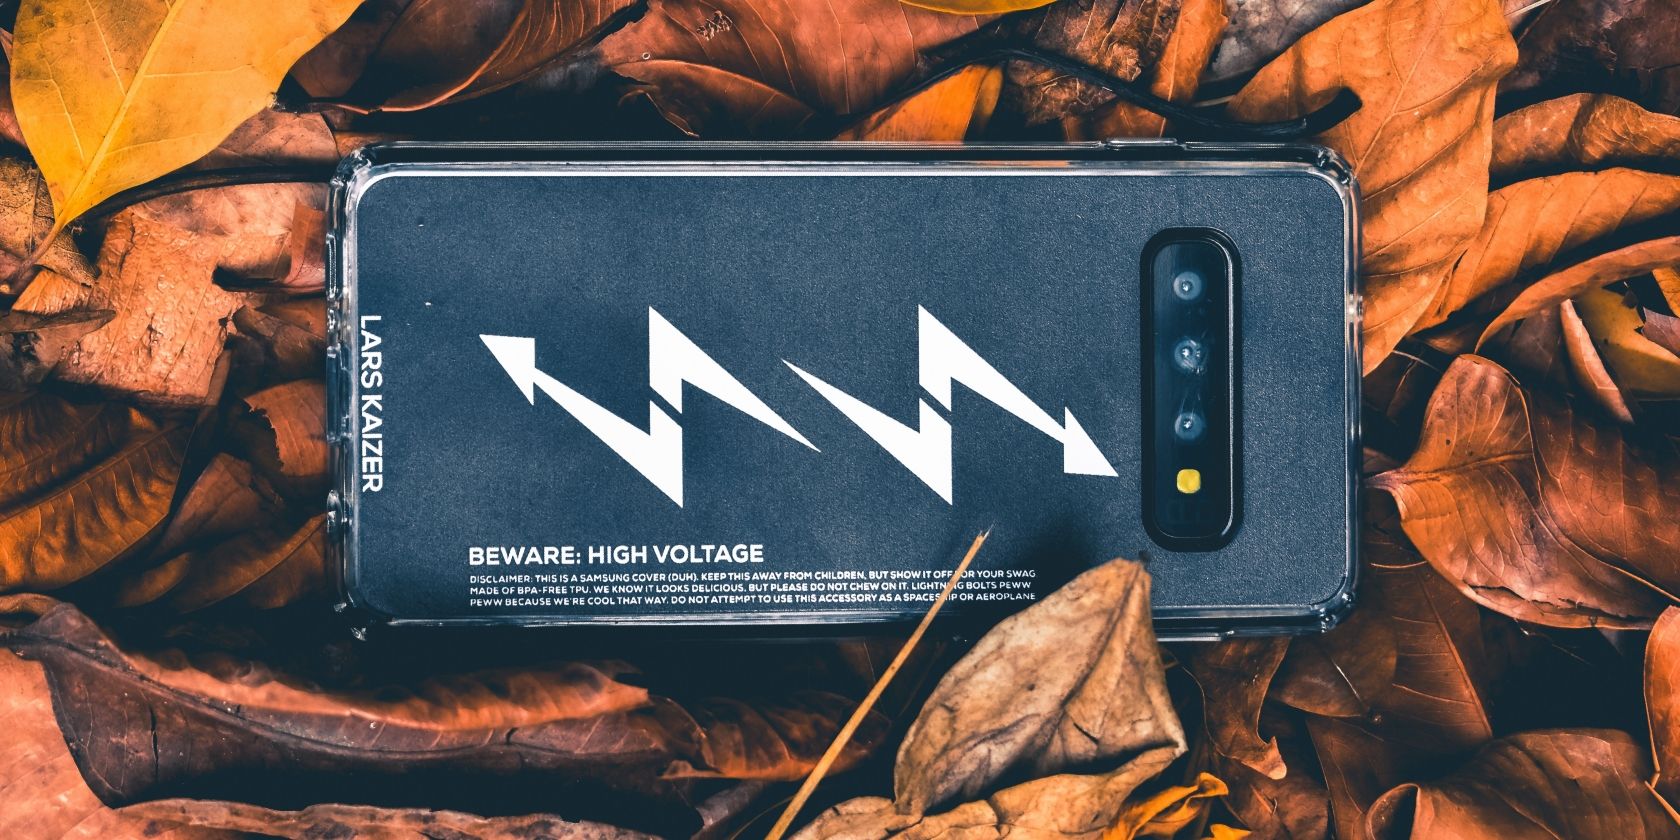 Samsung phone facedown on foliage, with a cover featuring a high voltage message on its back